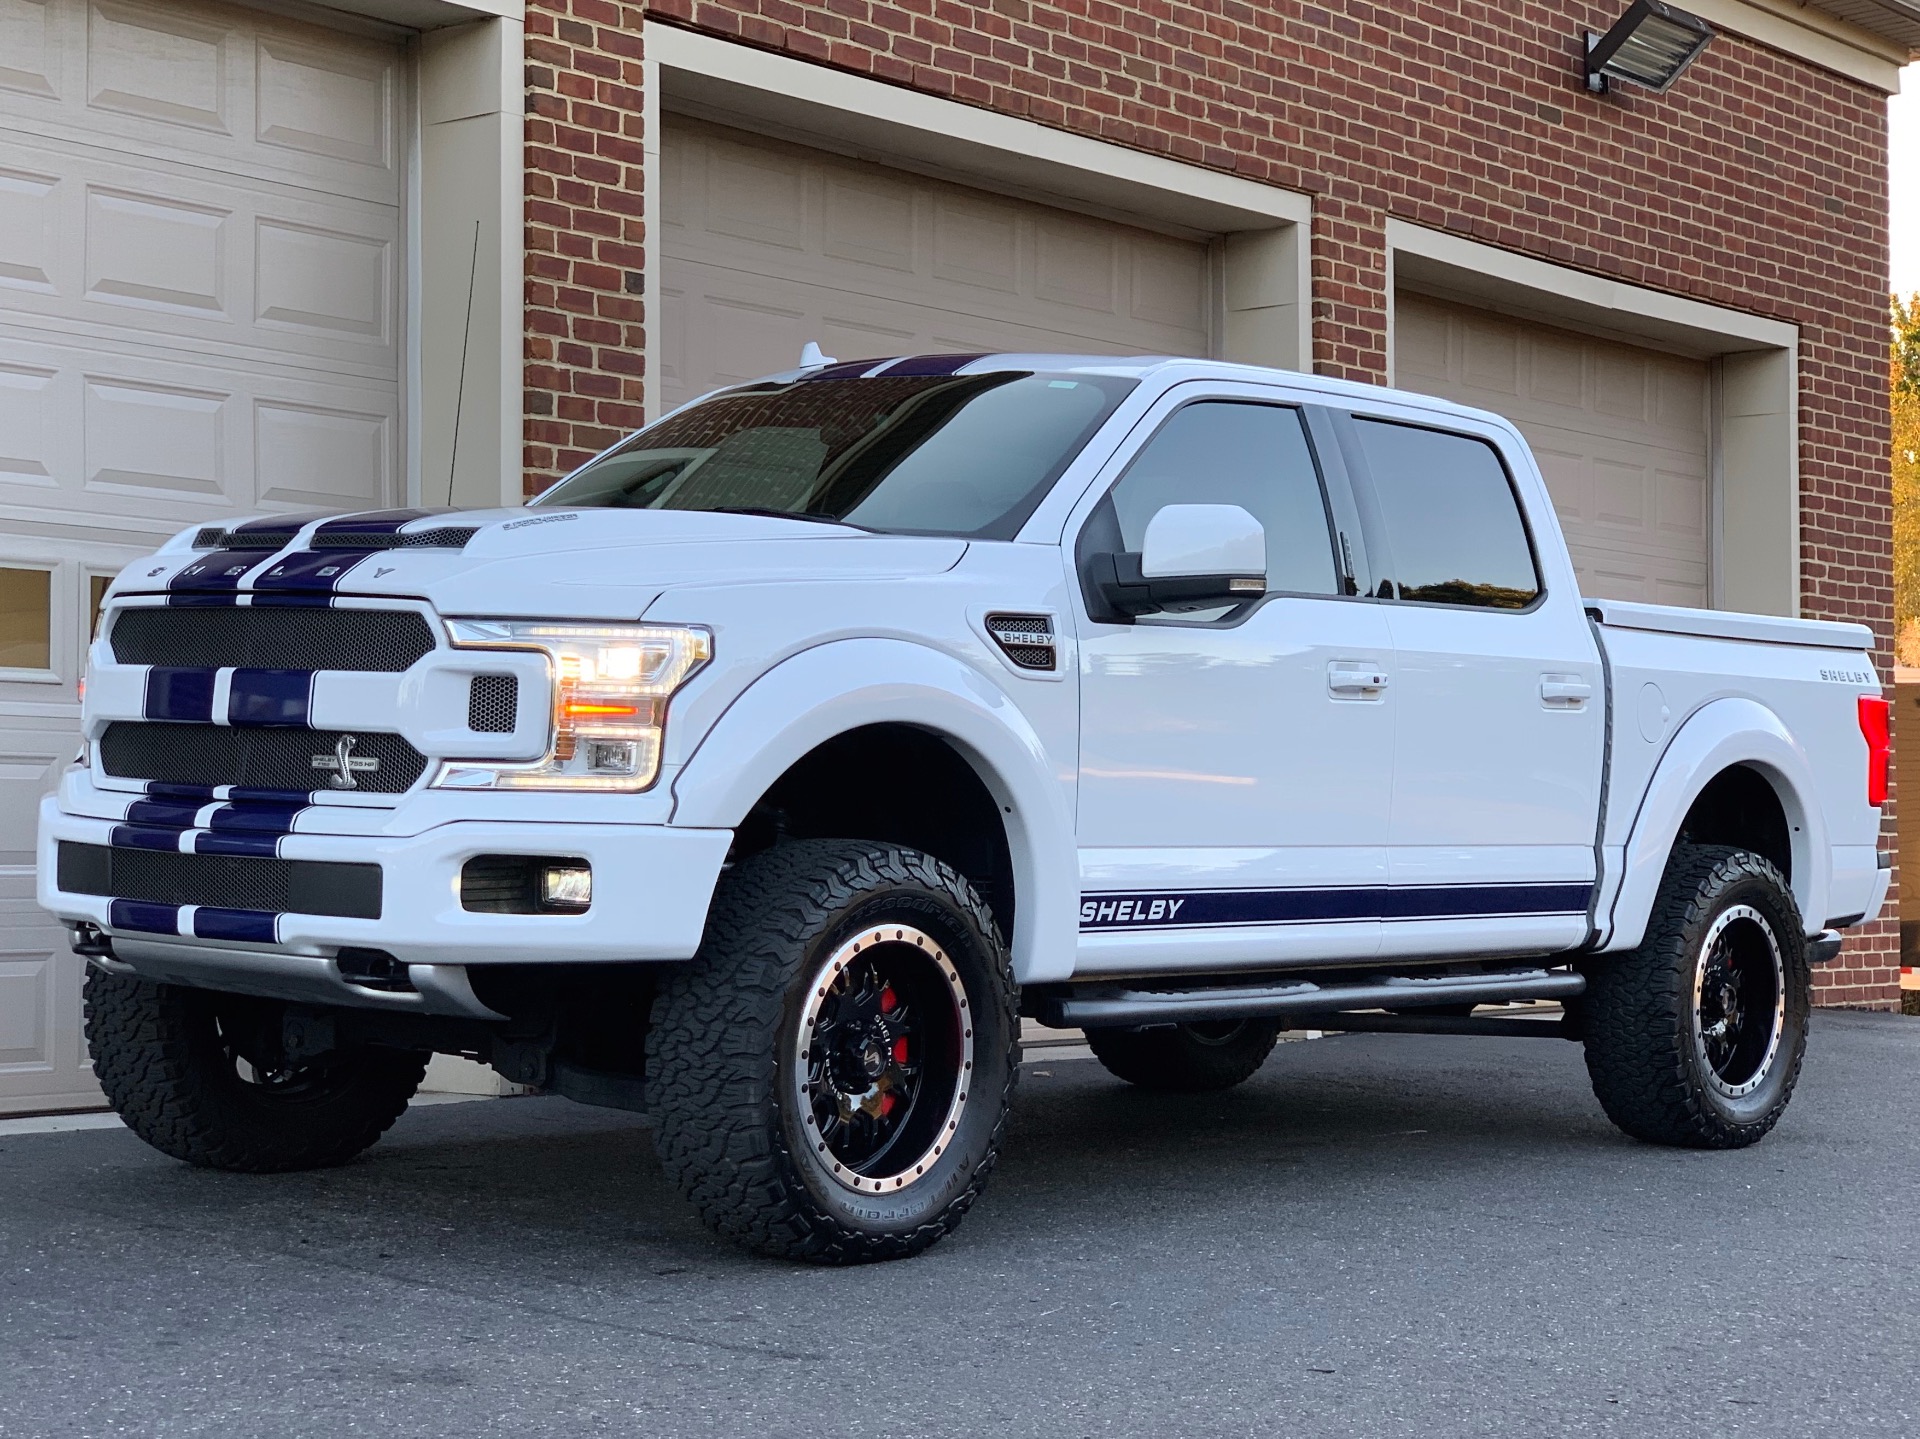 2018 Ford F-150 SHELBY Lariat Stock # D55646 for sale near Edgewater